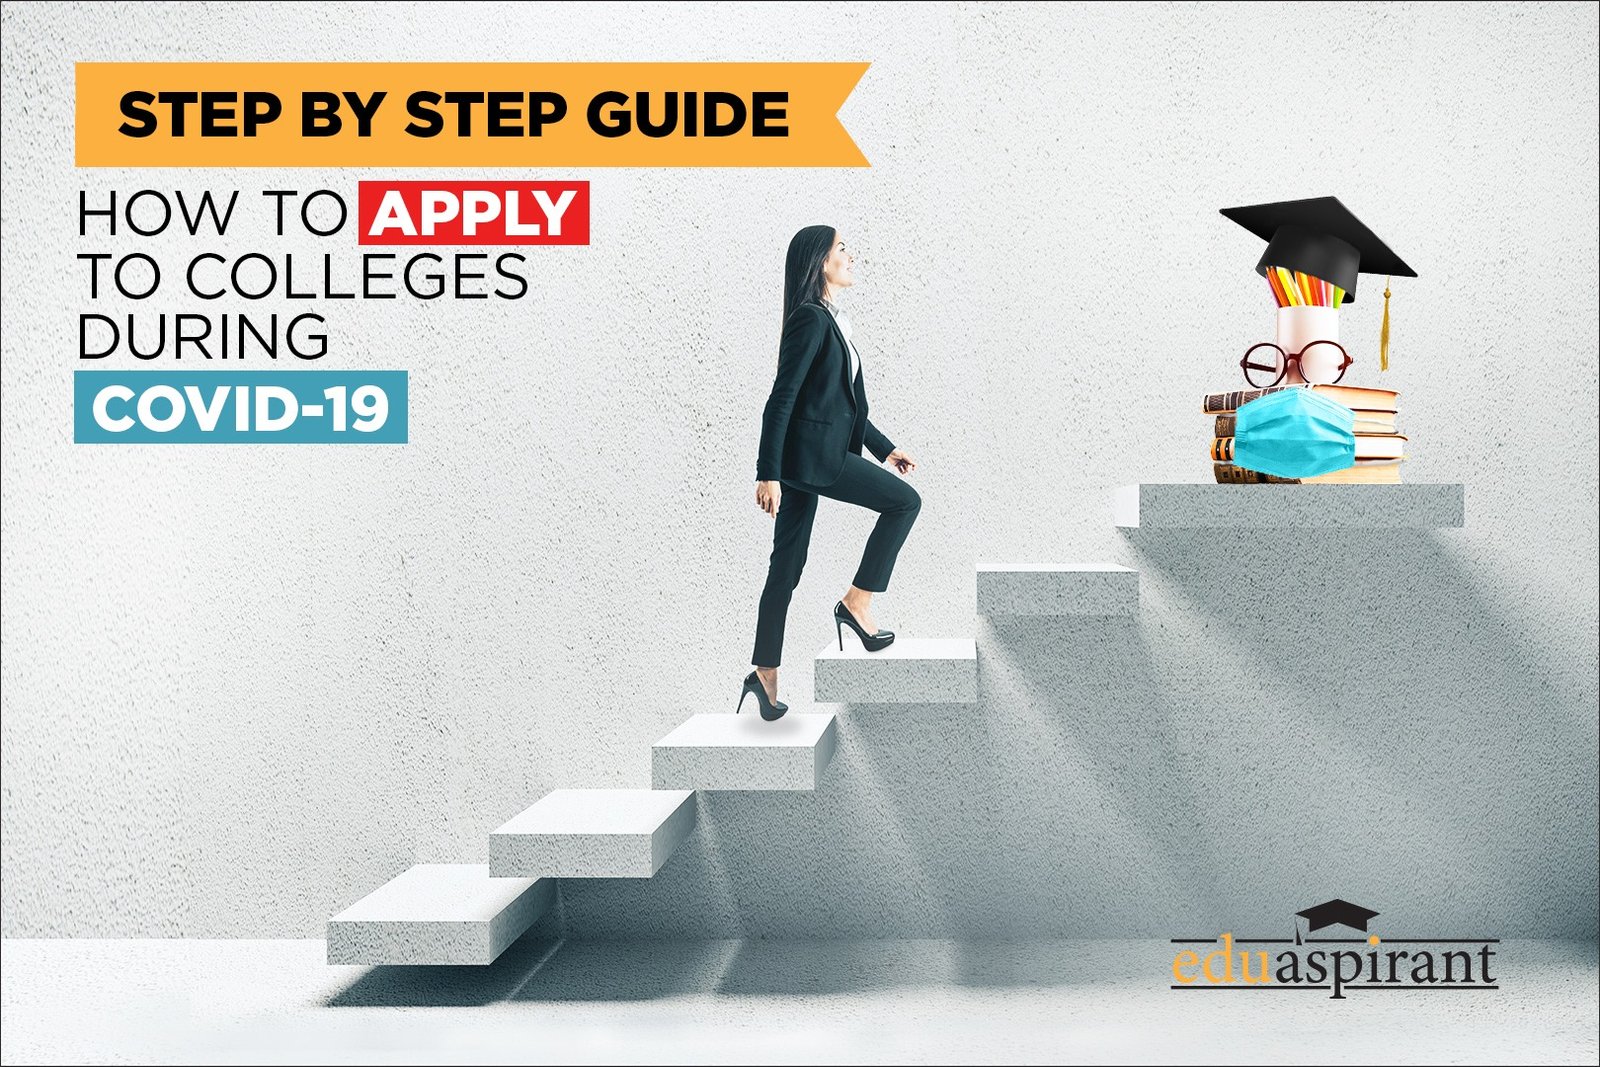 Your Step by Step Guide to the College Application Process during the Pandemic